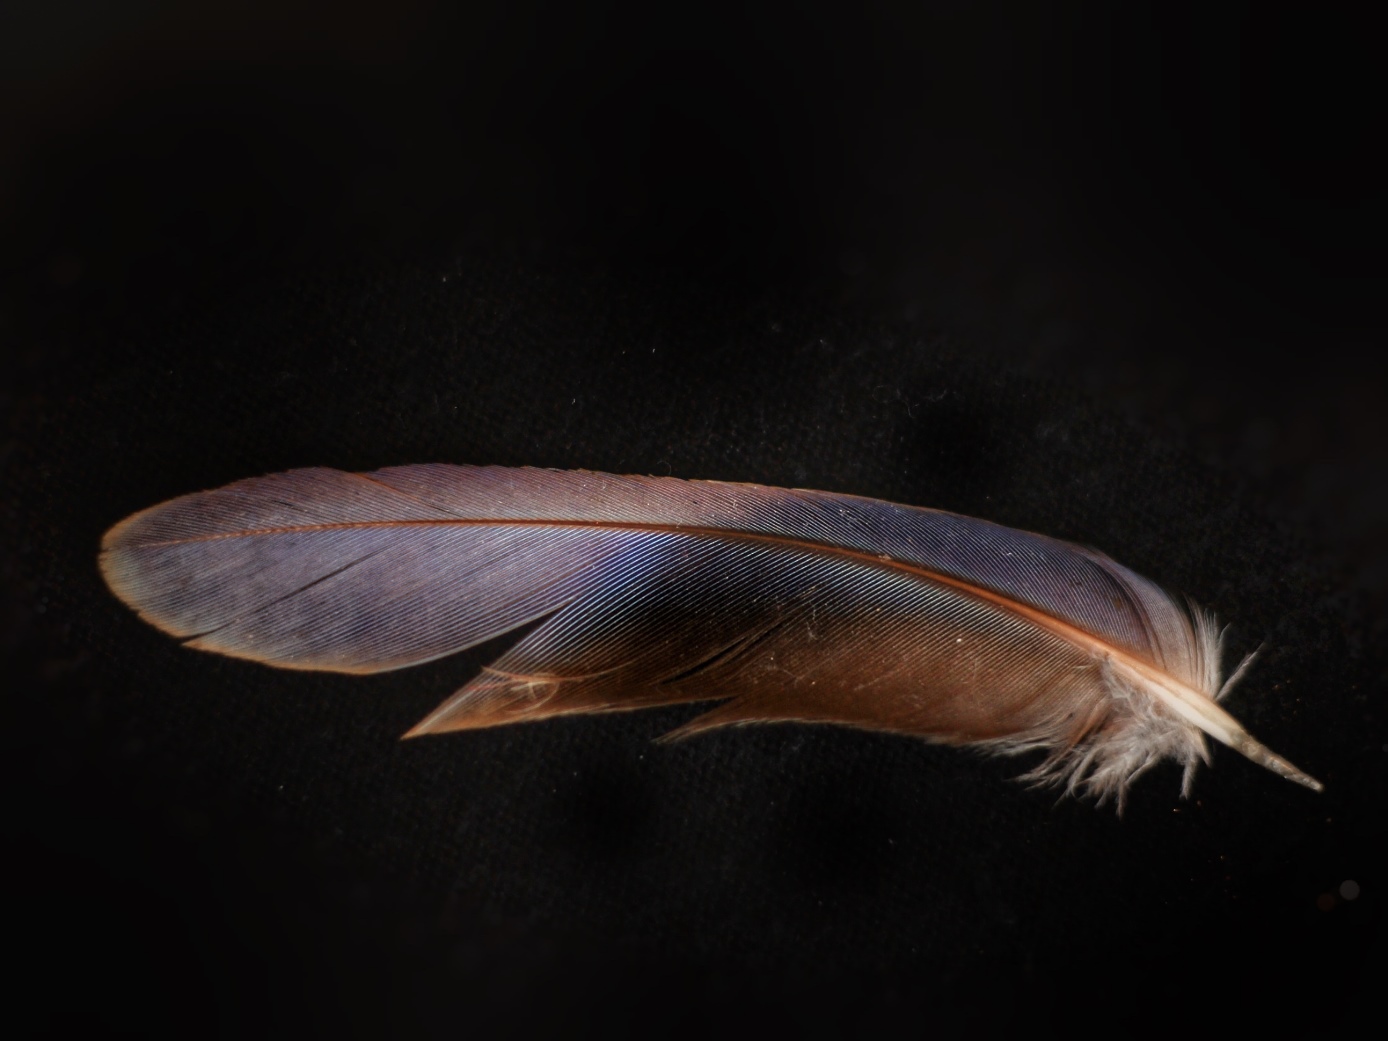 Close up shot of feather in shades of brown and blue. On black background. Image: Su Leslie, 2017